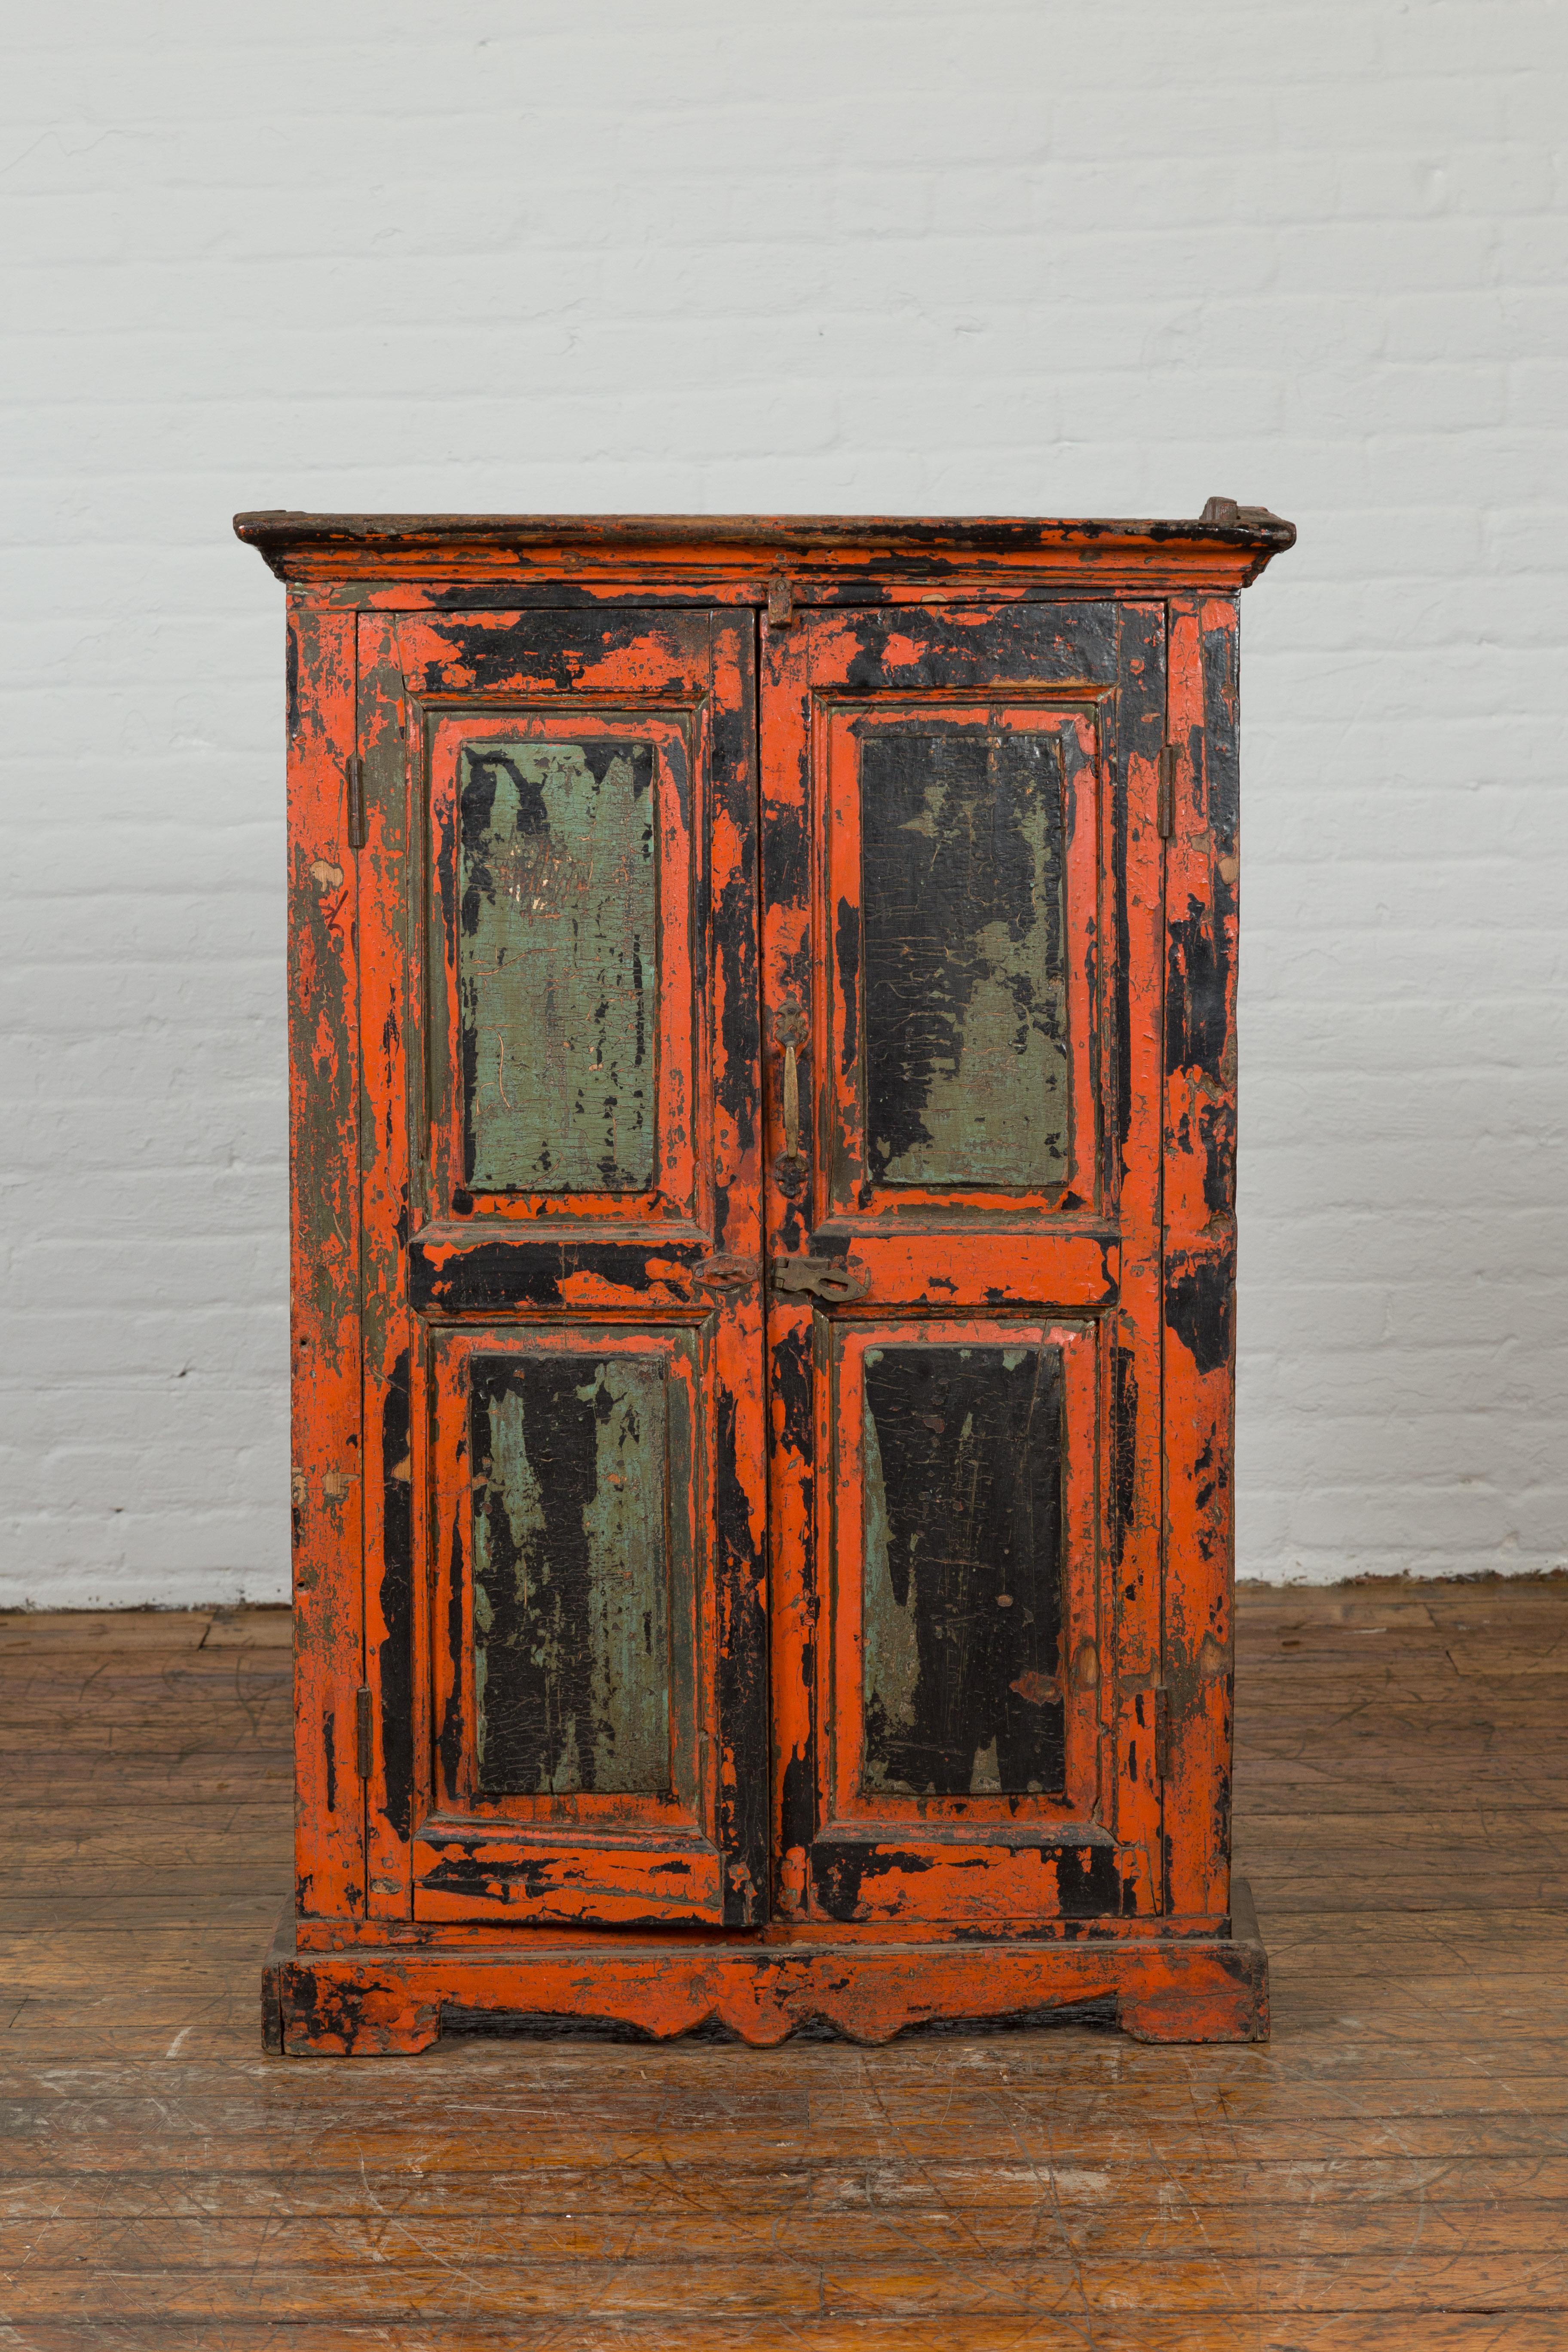 A stunning antique hand-painted cabinet with a beautiful distressed patina that makes this a unique addition to our vast antique cabinets collection. Created in India during the 19th century, our large antique cabinet features a long rectangular top